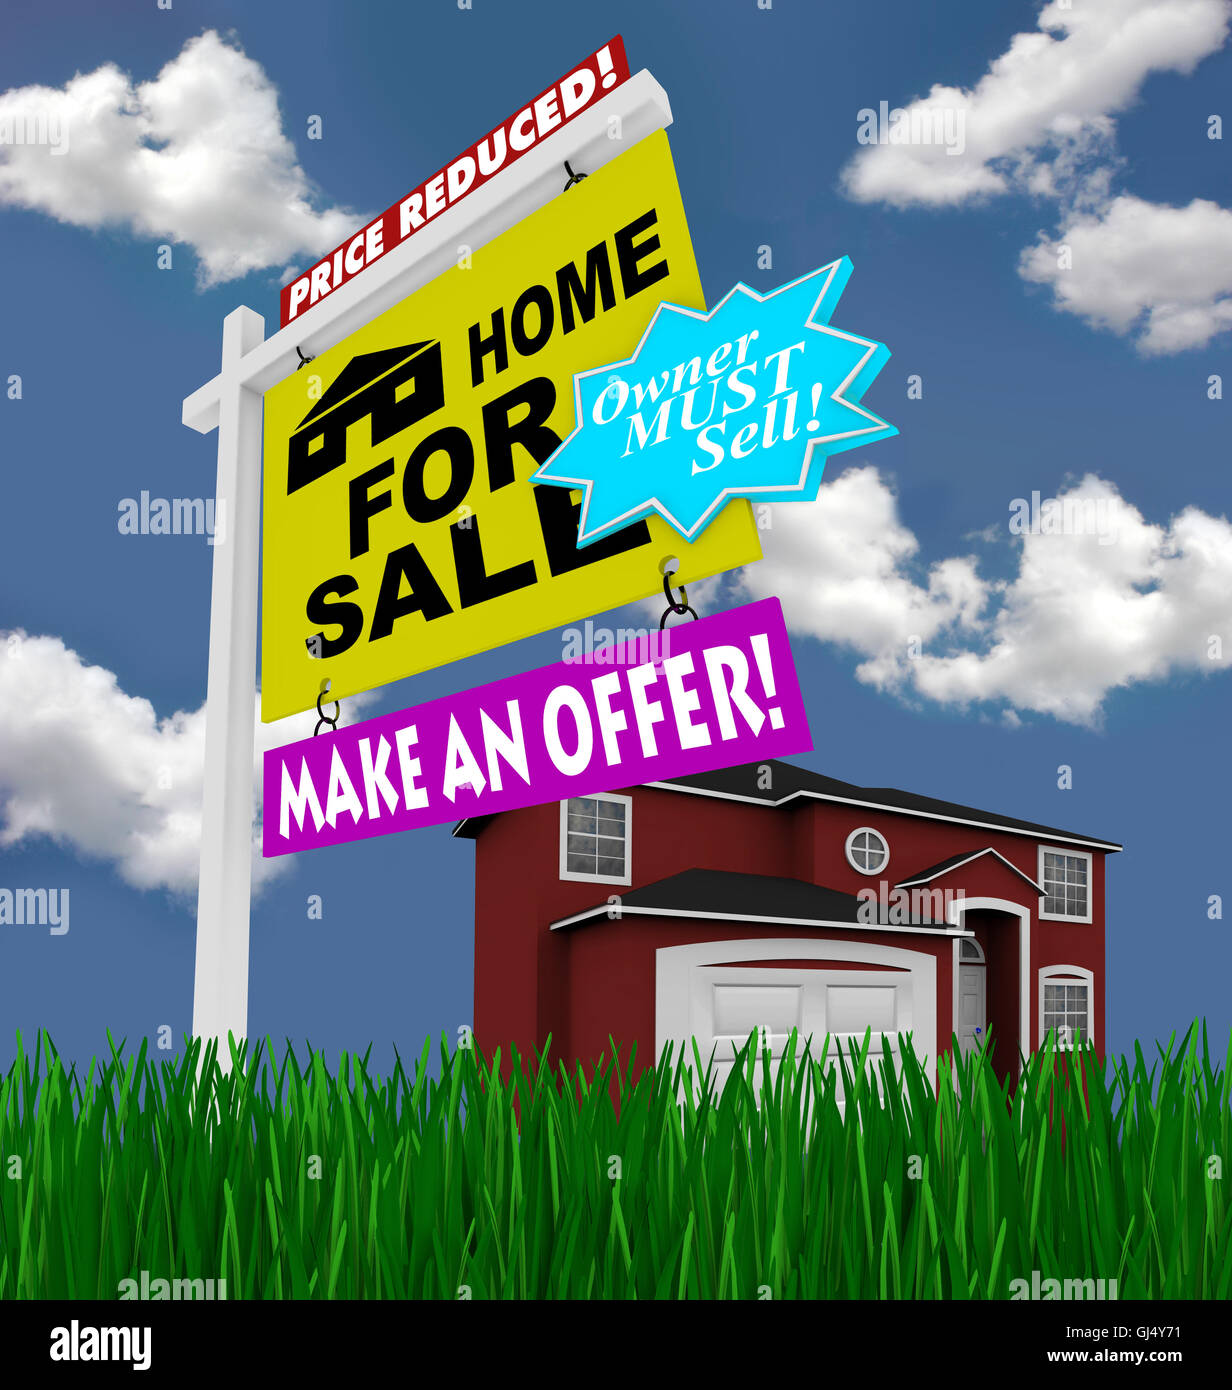 Home for Sale Sign - Desperate to Sell House Stock Photo